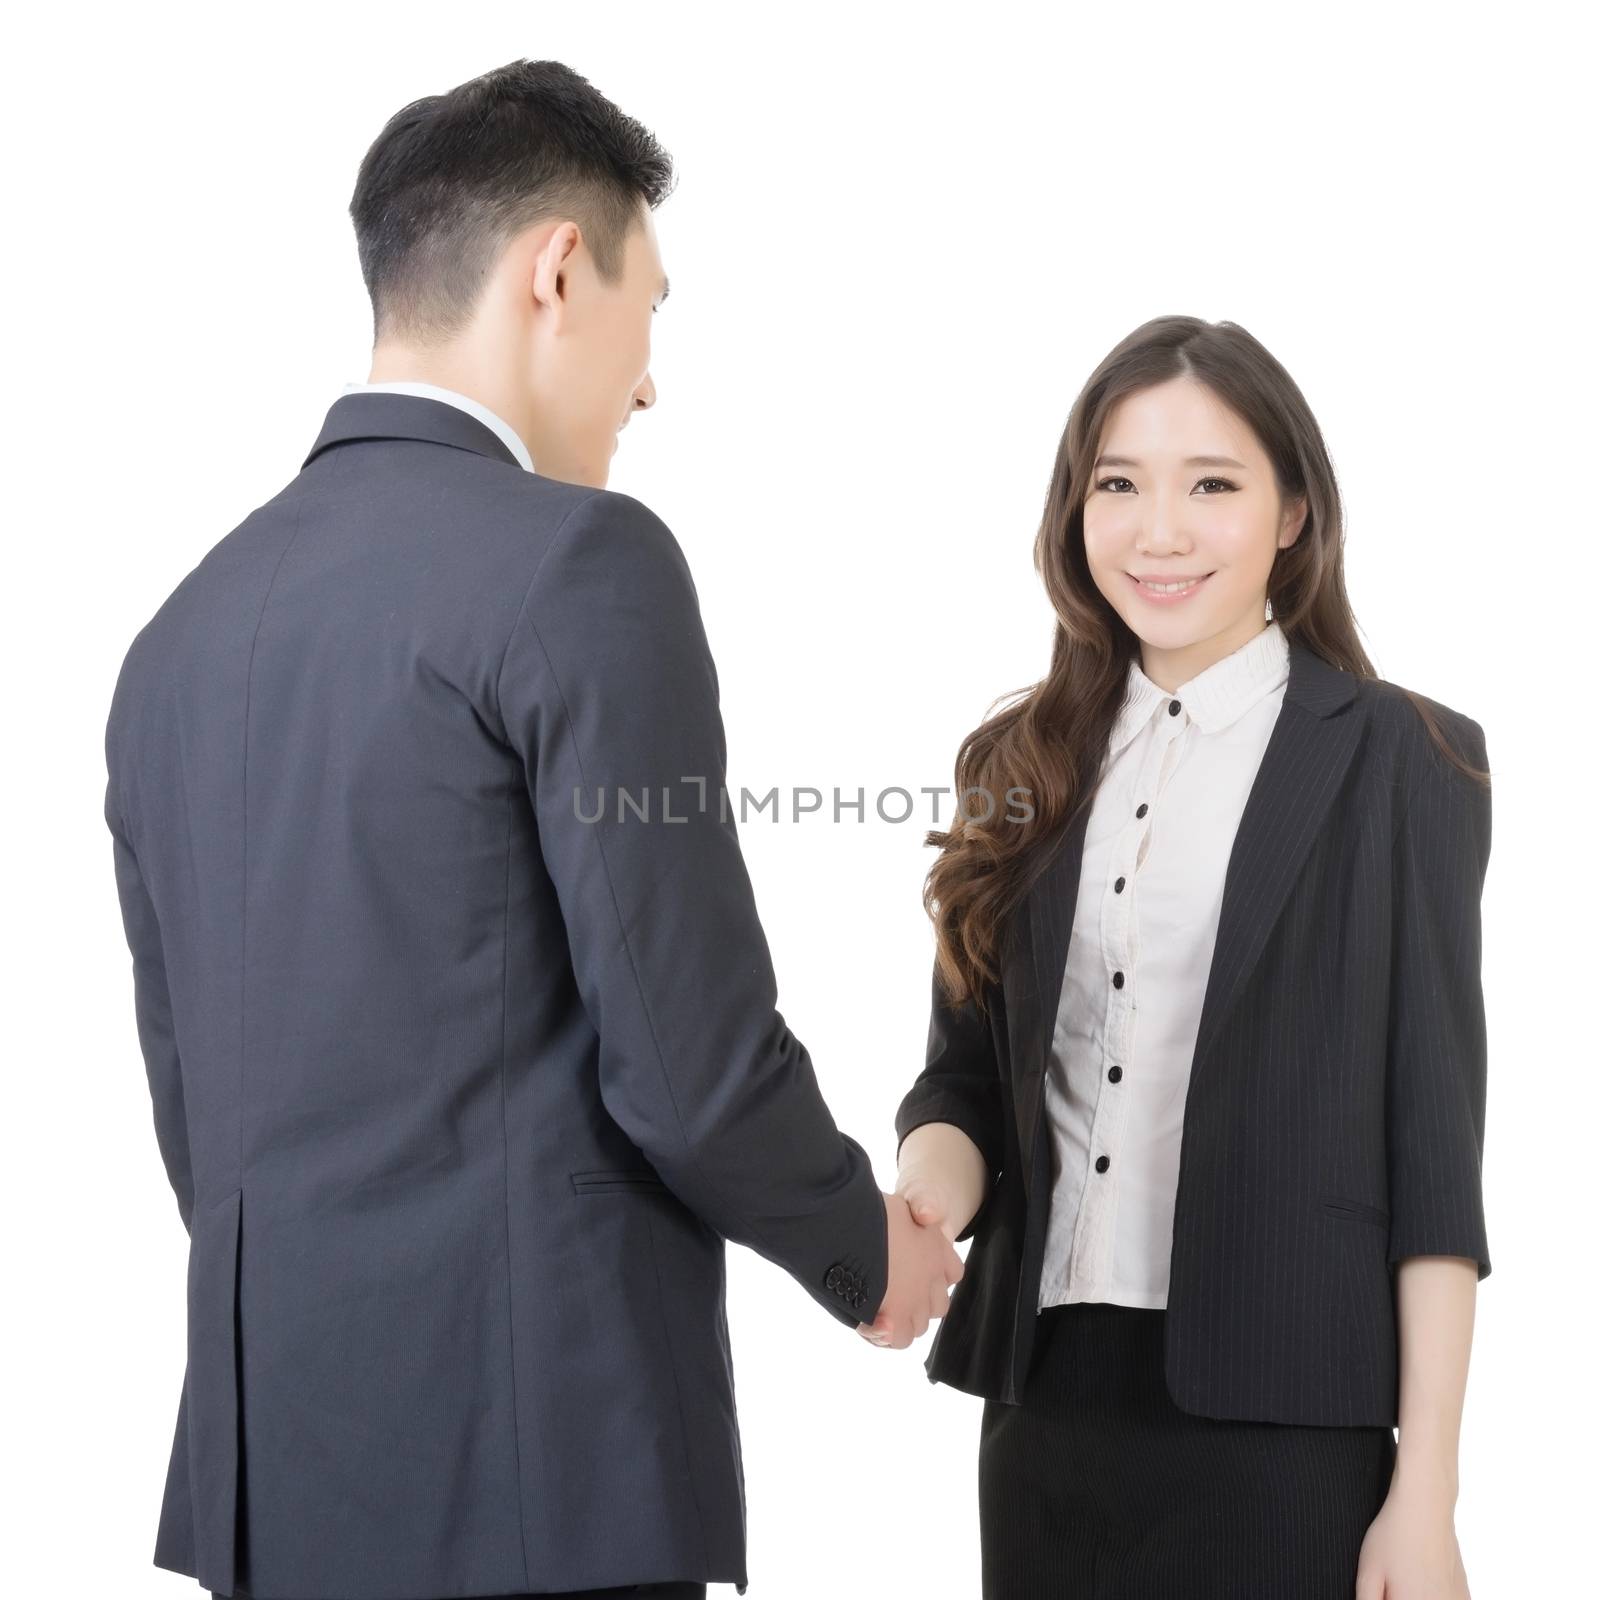 Business woman and man shake hands by elwynn